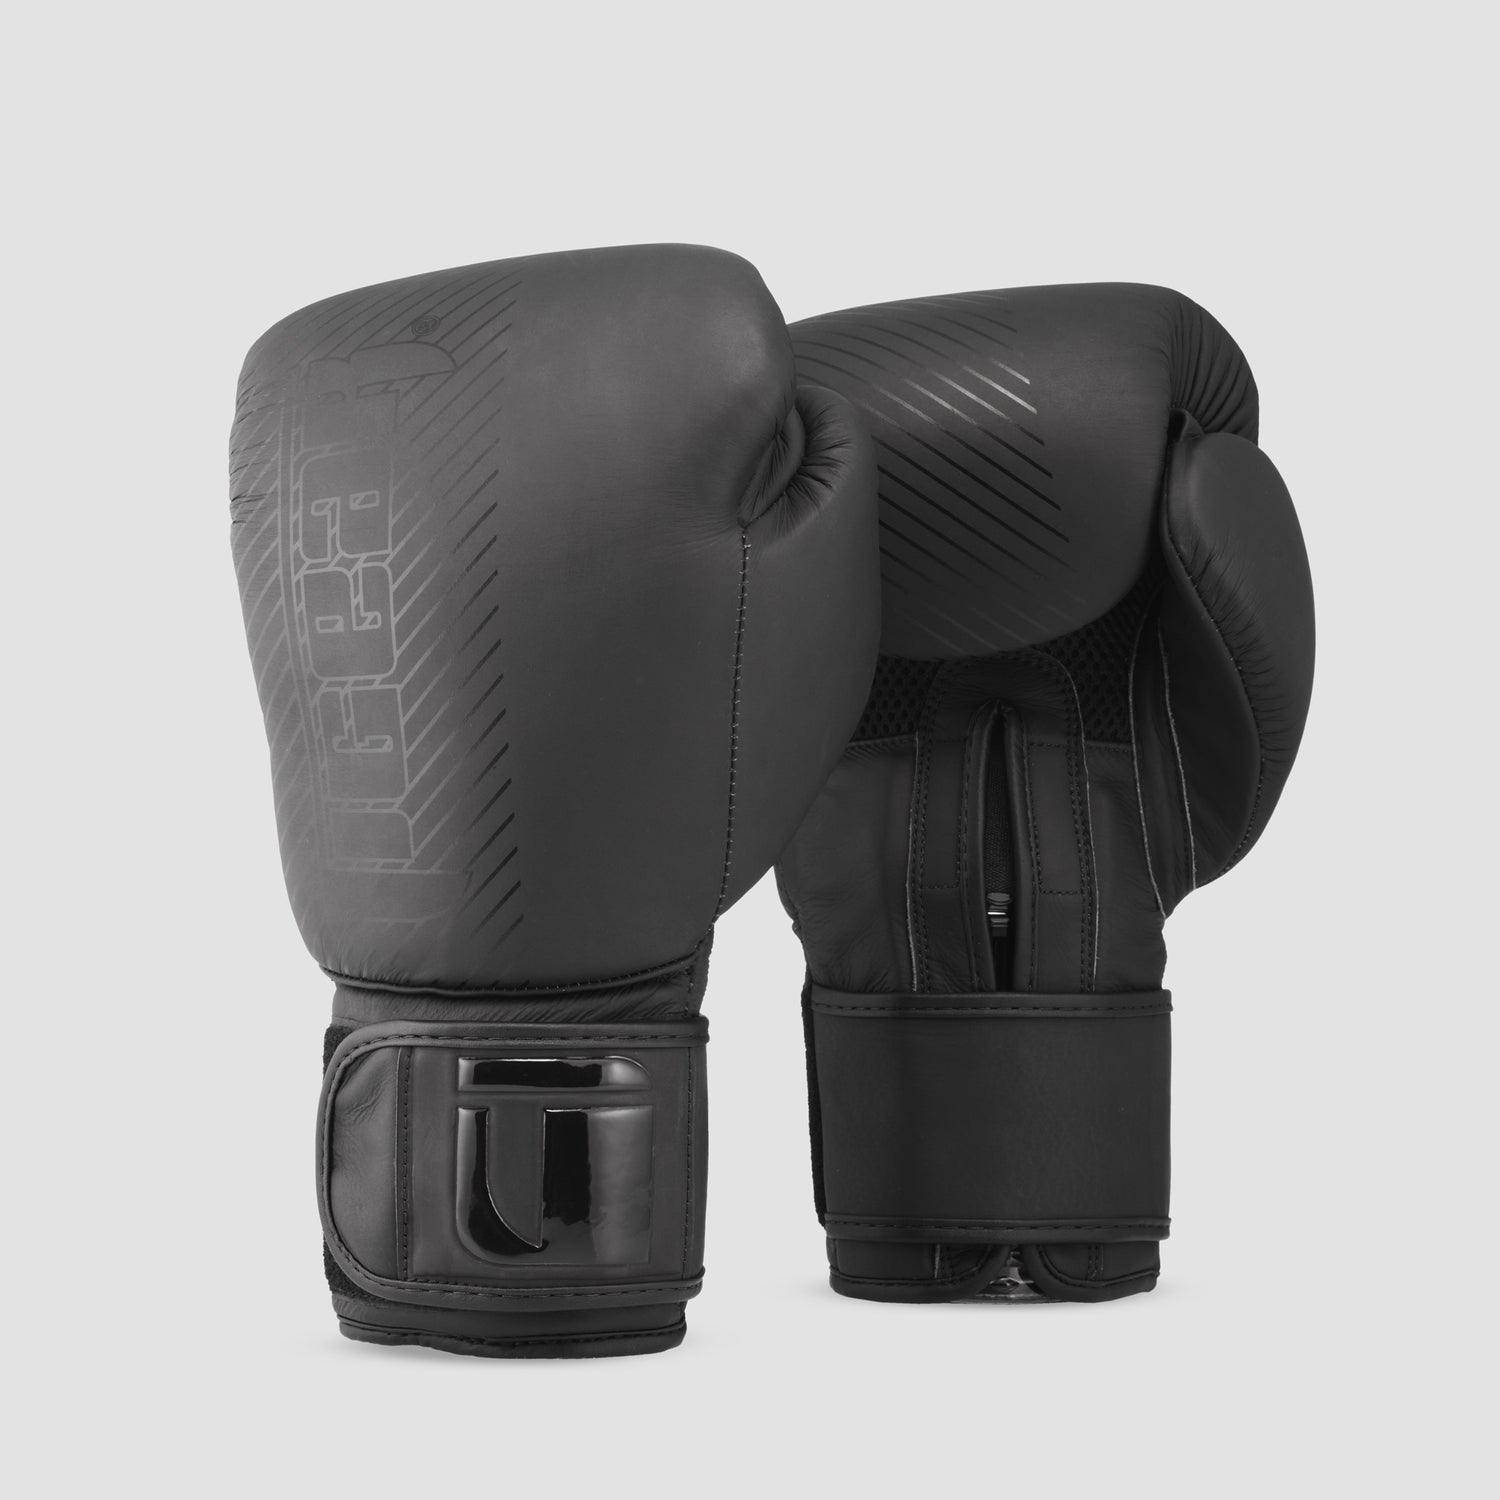 Training/Boxing Gloves Carbon